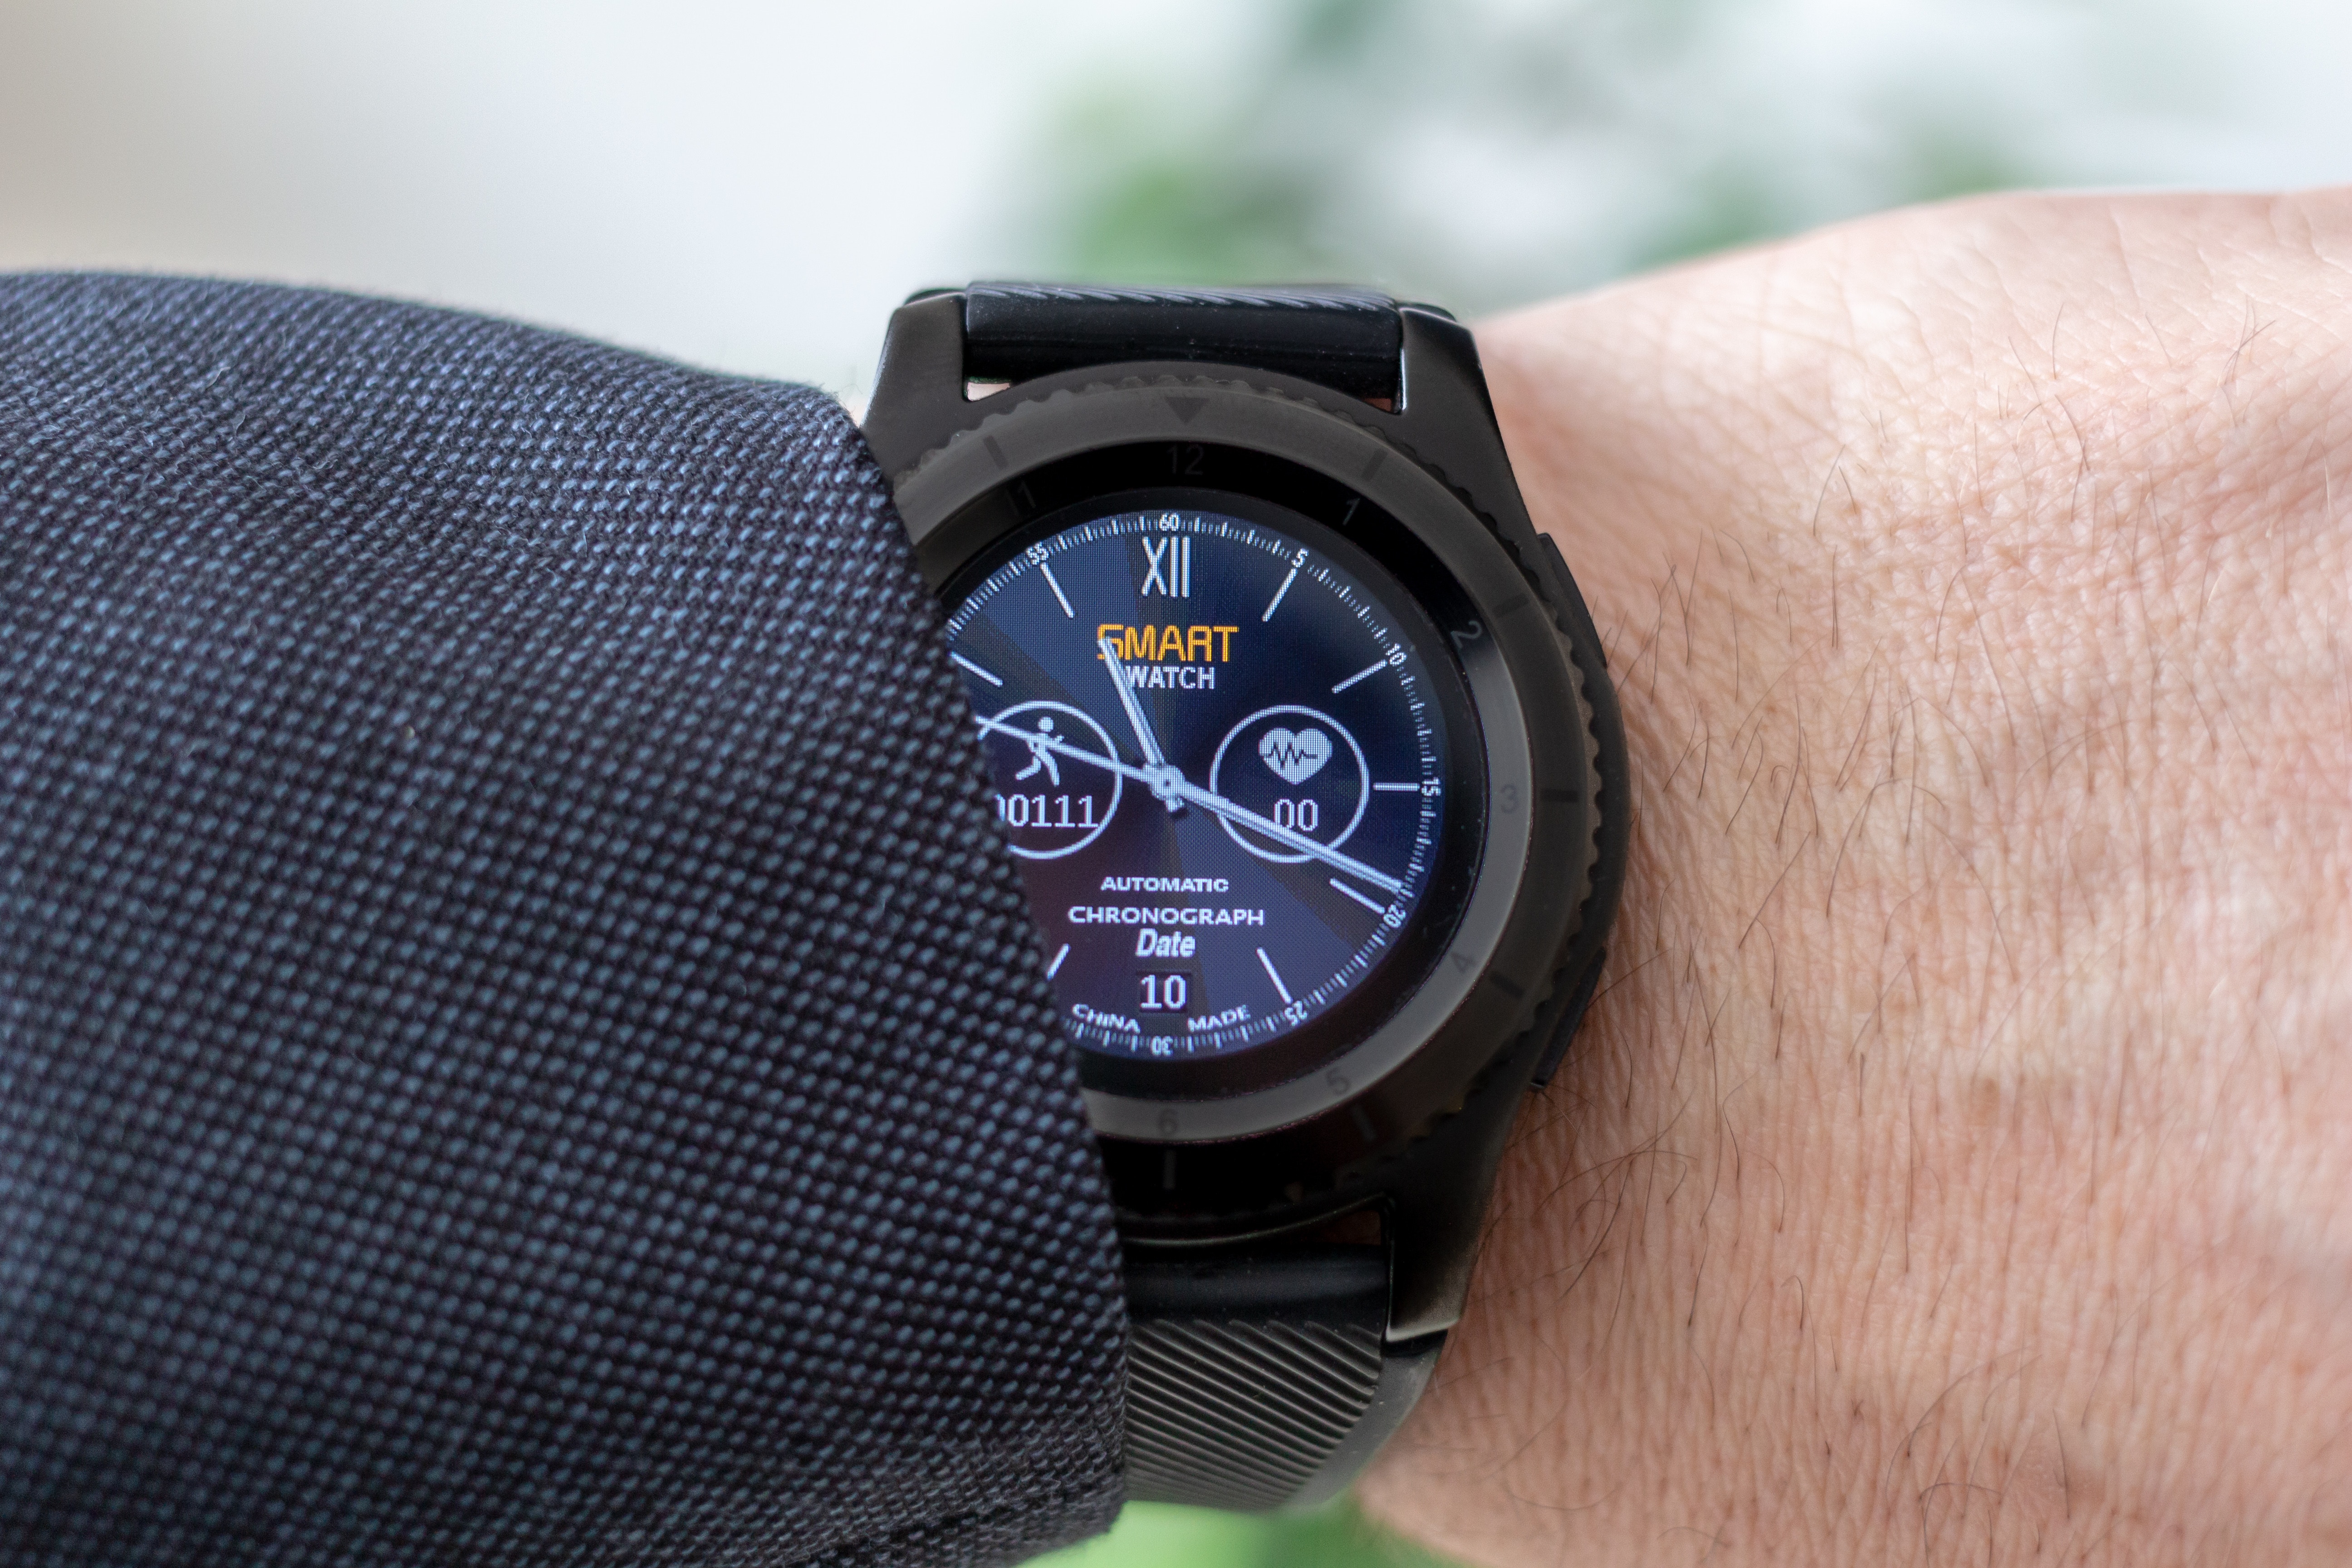 What to think about when designing a smartwatch app